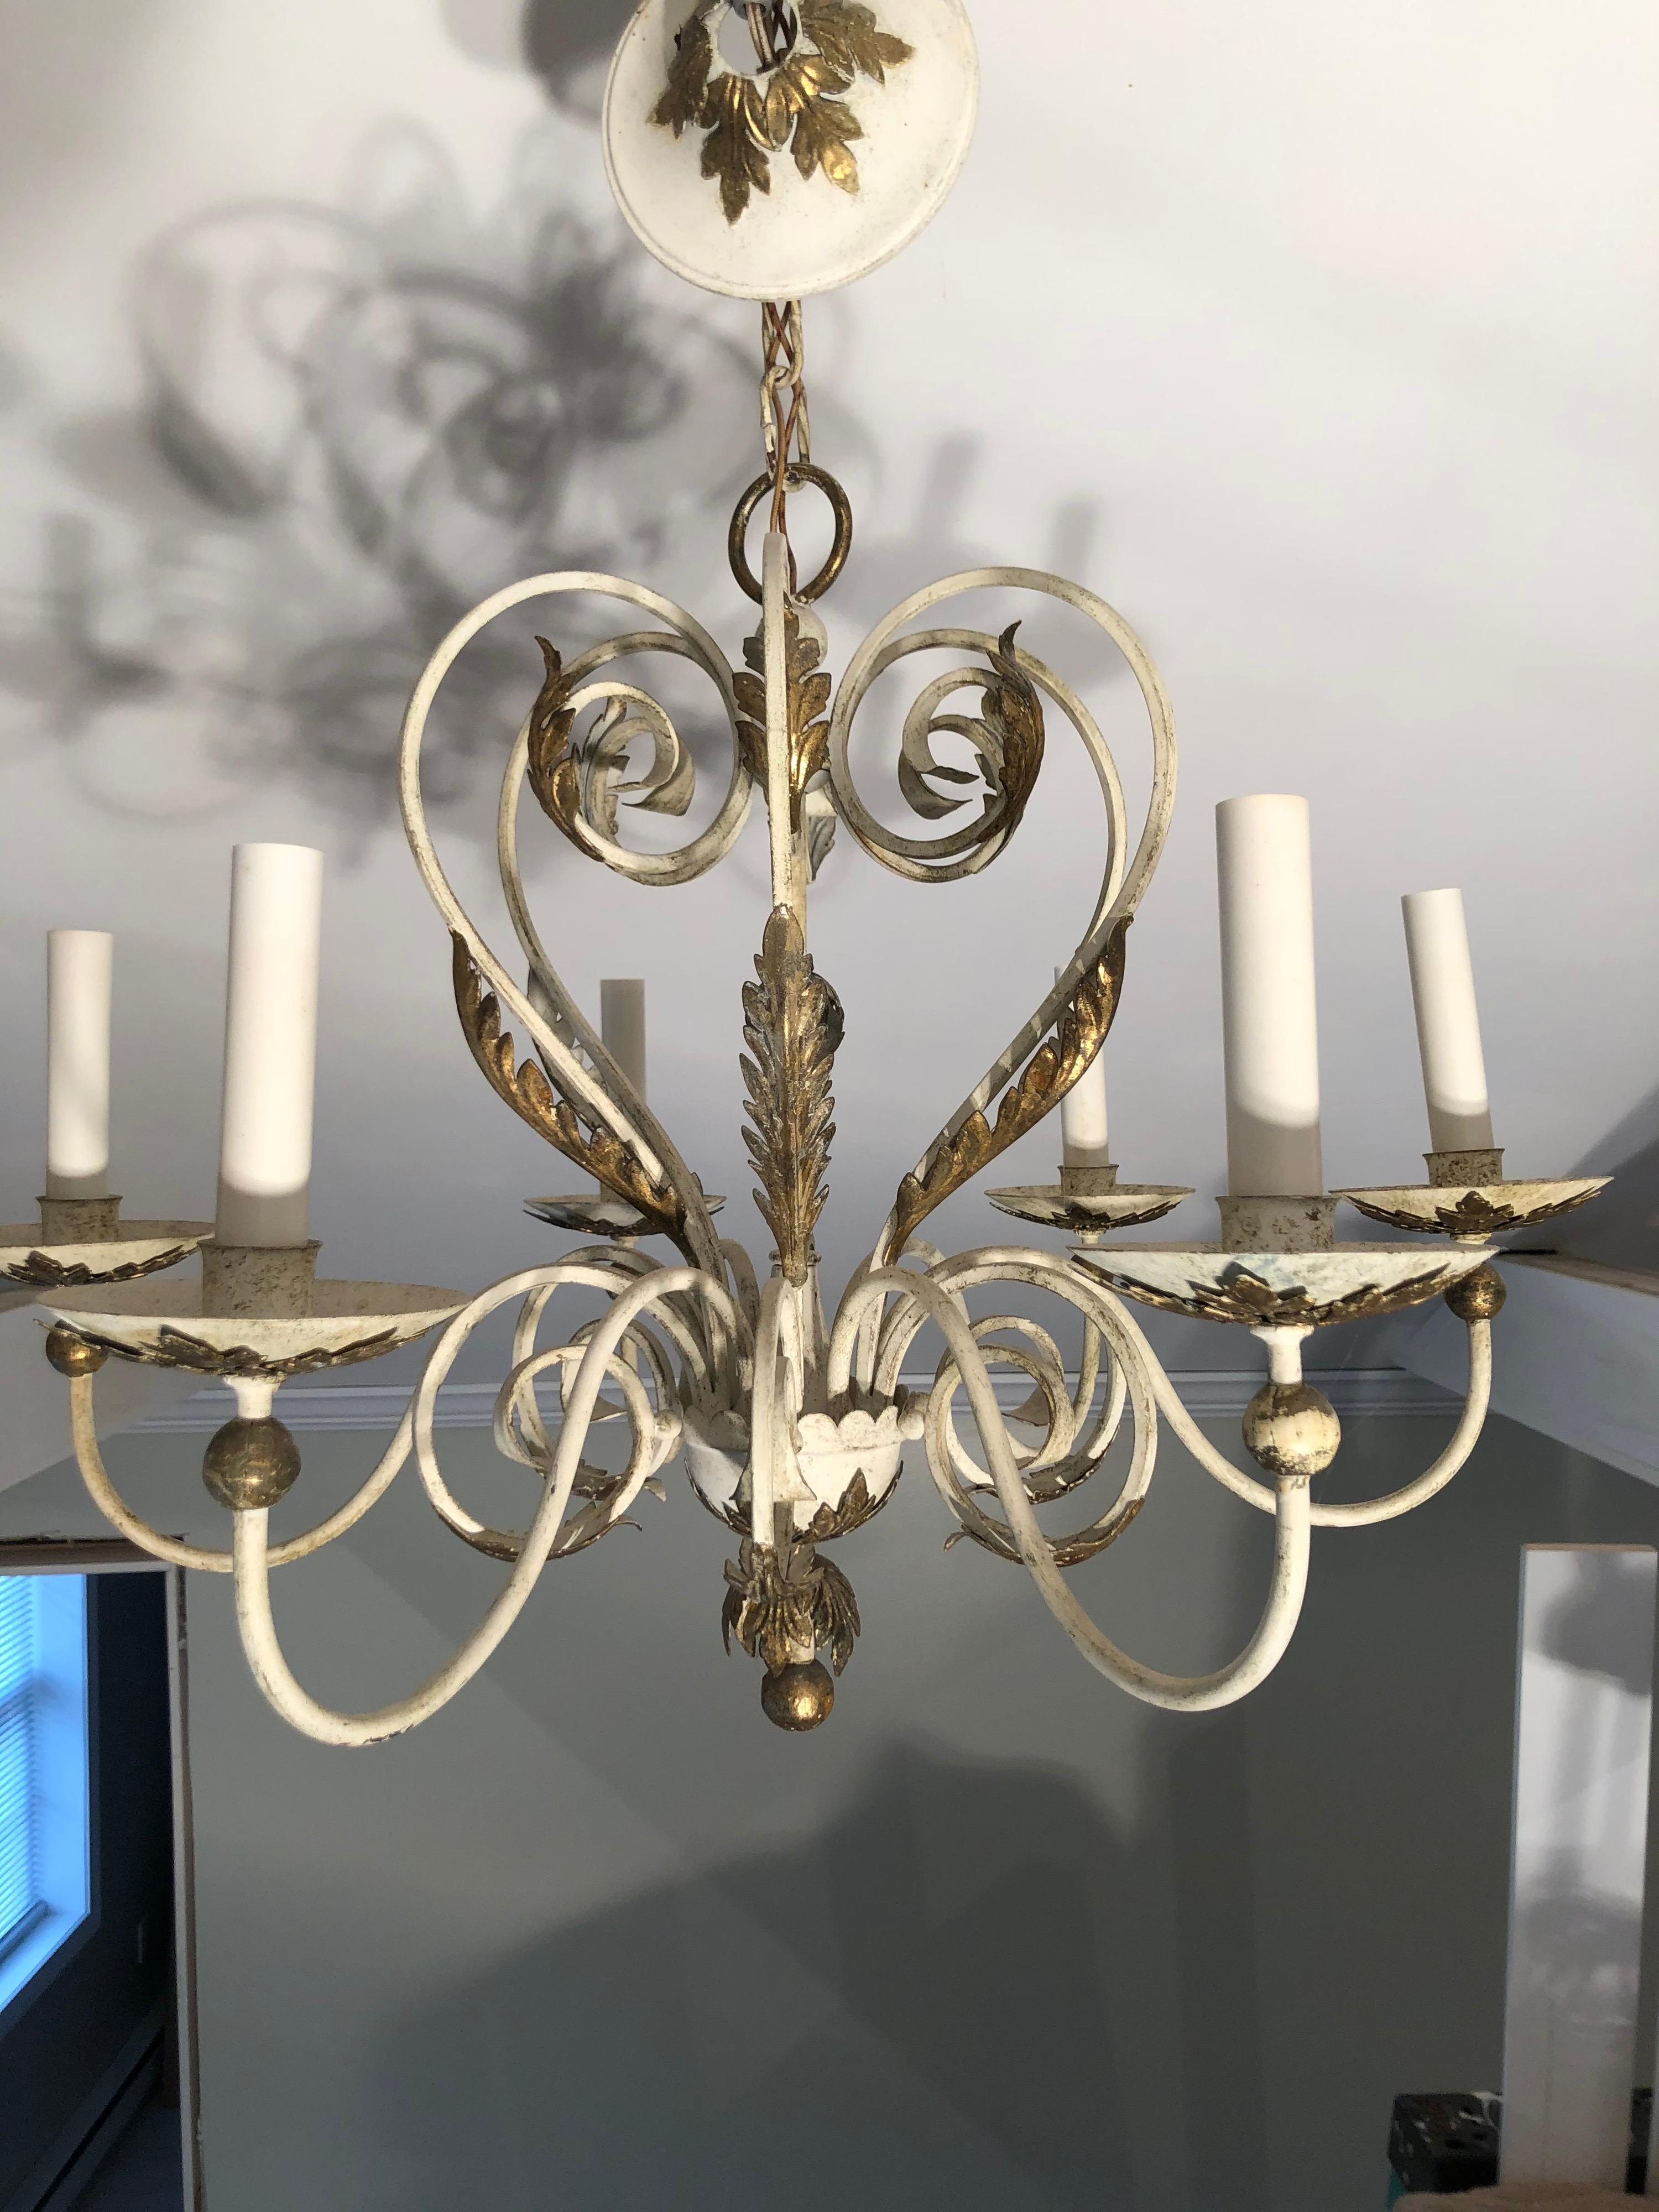 Shabby chic white and gold washed chandelier. Gorgeous six-arm electrified chandelier accented with gold acanthus style fern leaves. This item should parcel ship for $45